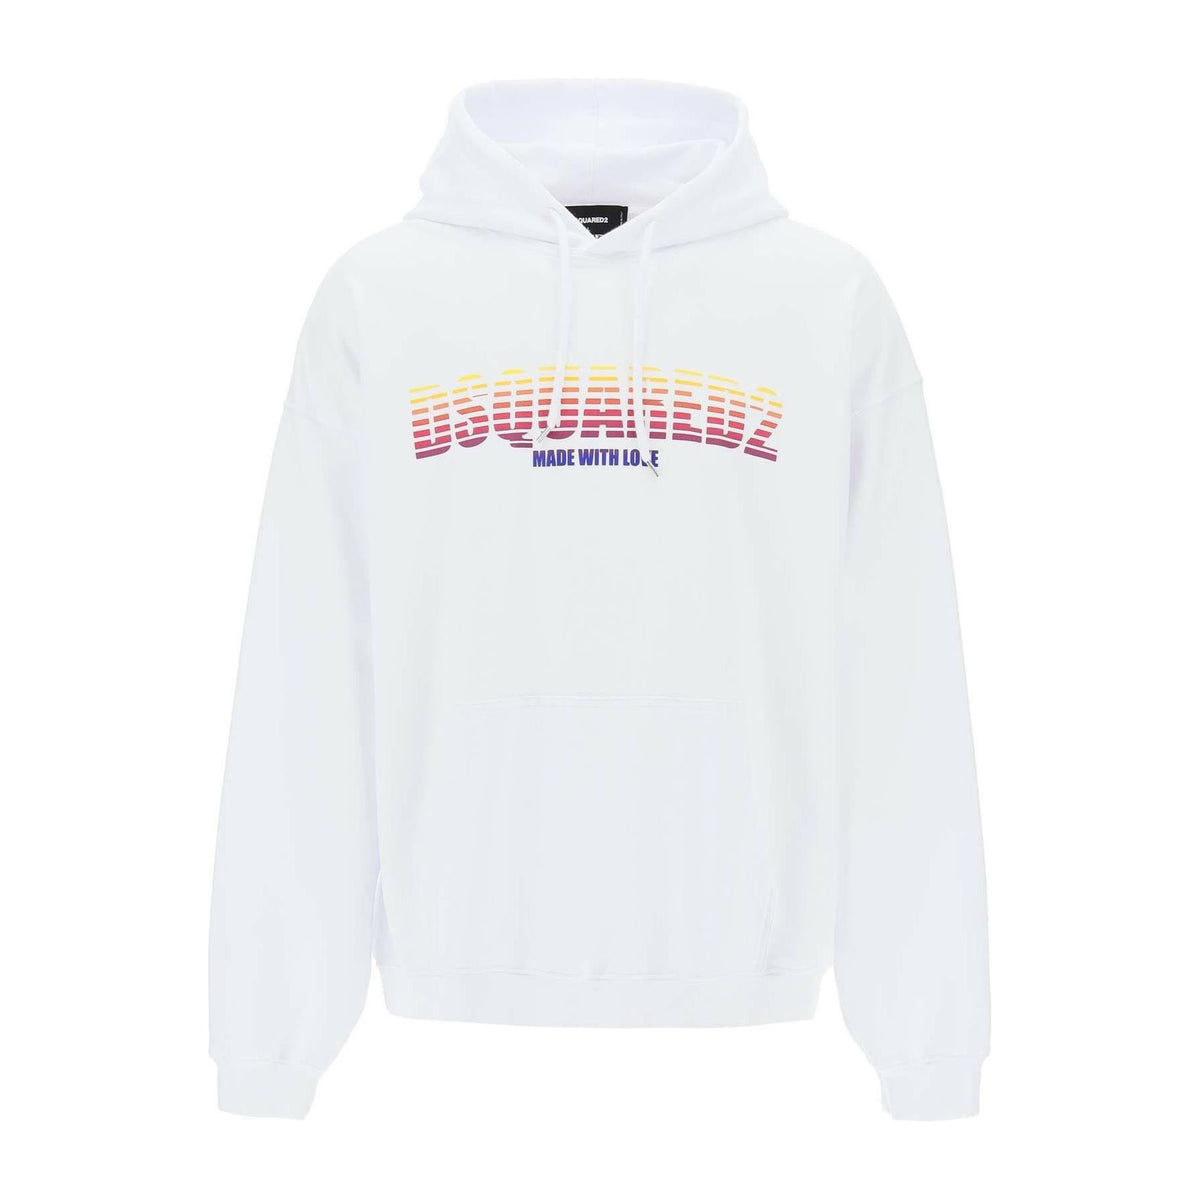 DSQUARED2 - White Loose-Fit Cotton Sweatshirt With Multicolored Graphic Lettering - JOHN JULIA